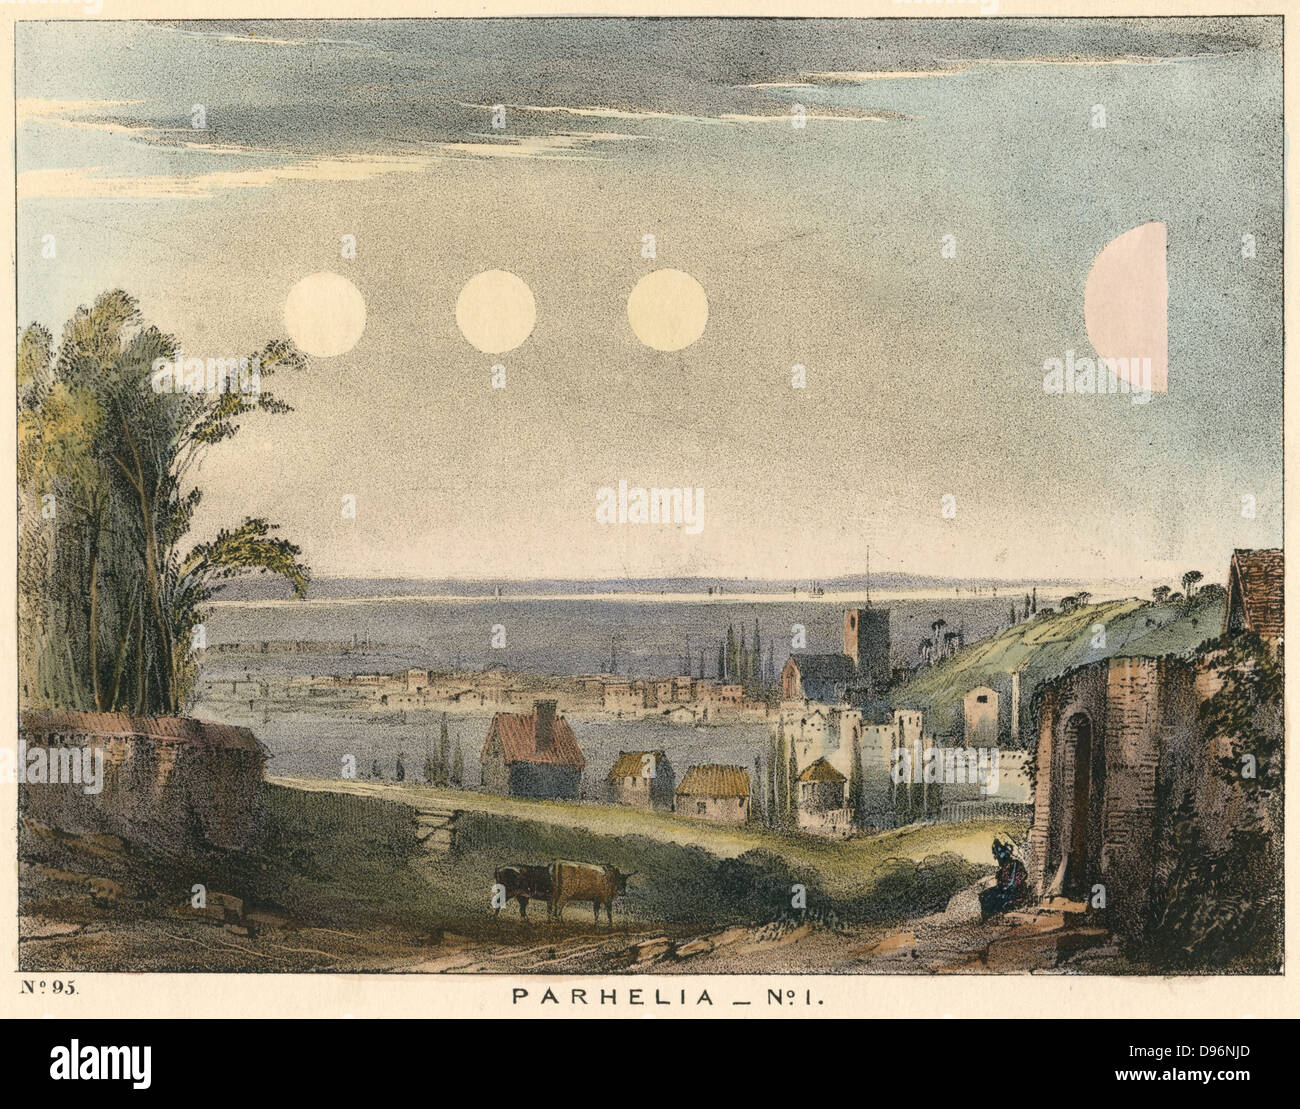 Parhelia (Mock Suns) without haloes, observed in England in 1698.  On this occasion the phenomenon, caused by atmospheric refraction, began at 8am when true Sun shone through watery cloud, with mock suns appearing either side, and a pink half mock sun further off.  The phenomenon  lasted for two hours.  From 'The Beauty of the Heavens', Charles F Blunt, (London, 1845). Coloured lithograph. Stock Photo